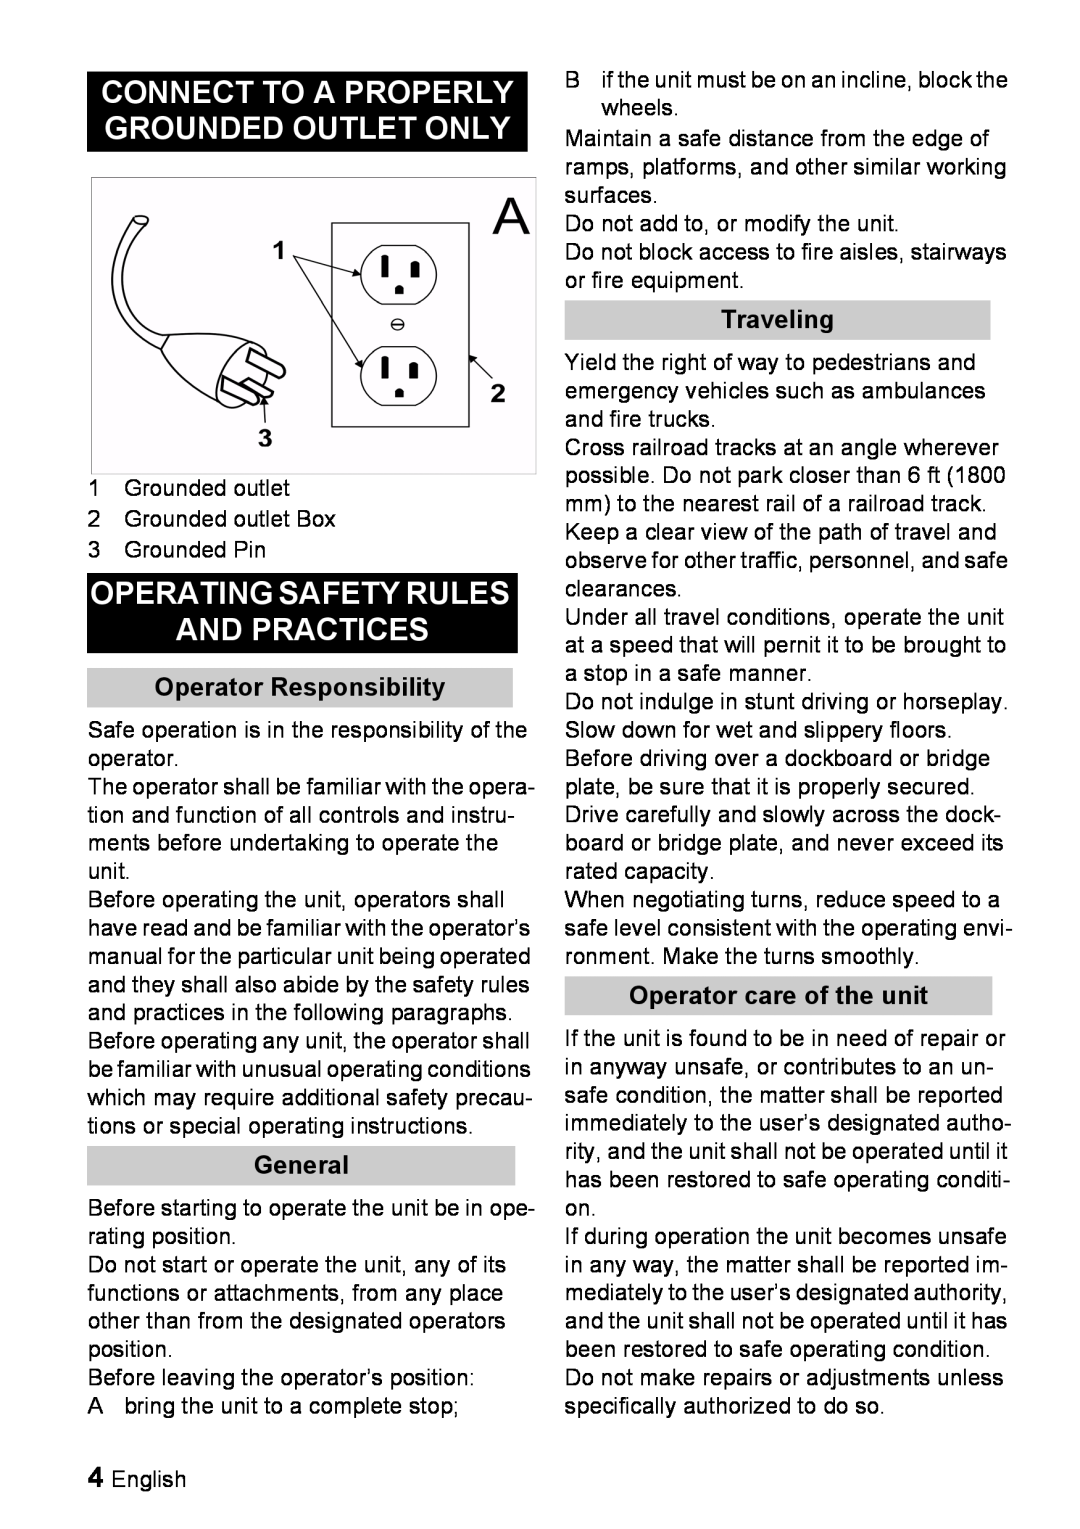 Windsor 16 manual Connect To A Properly Grounded Outlet Only, Operating Safety Rules And Practices, Operator Responsibility 